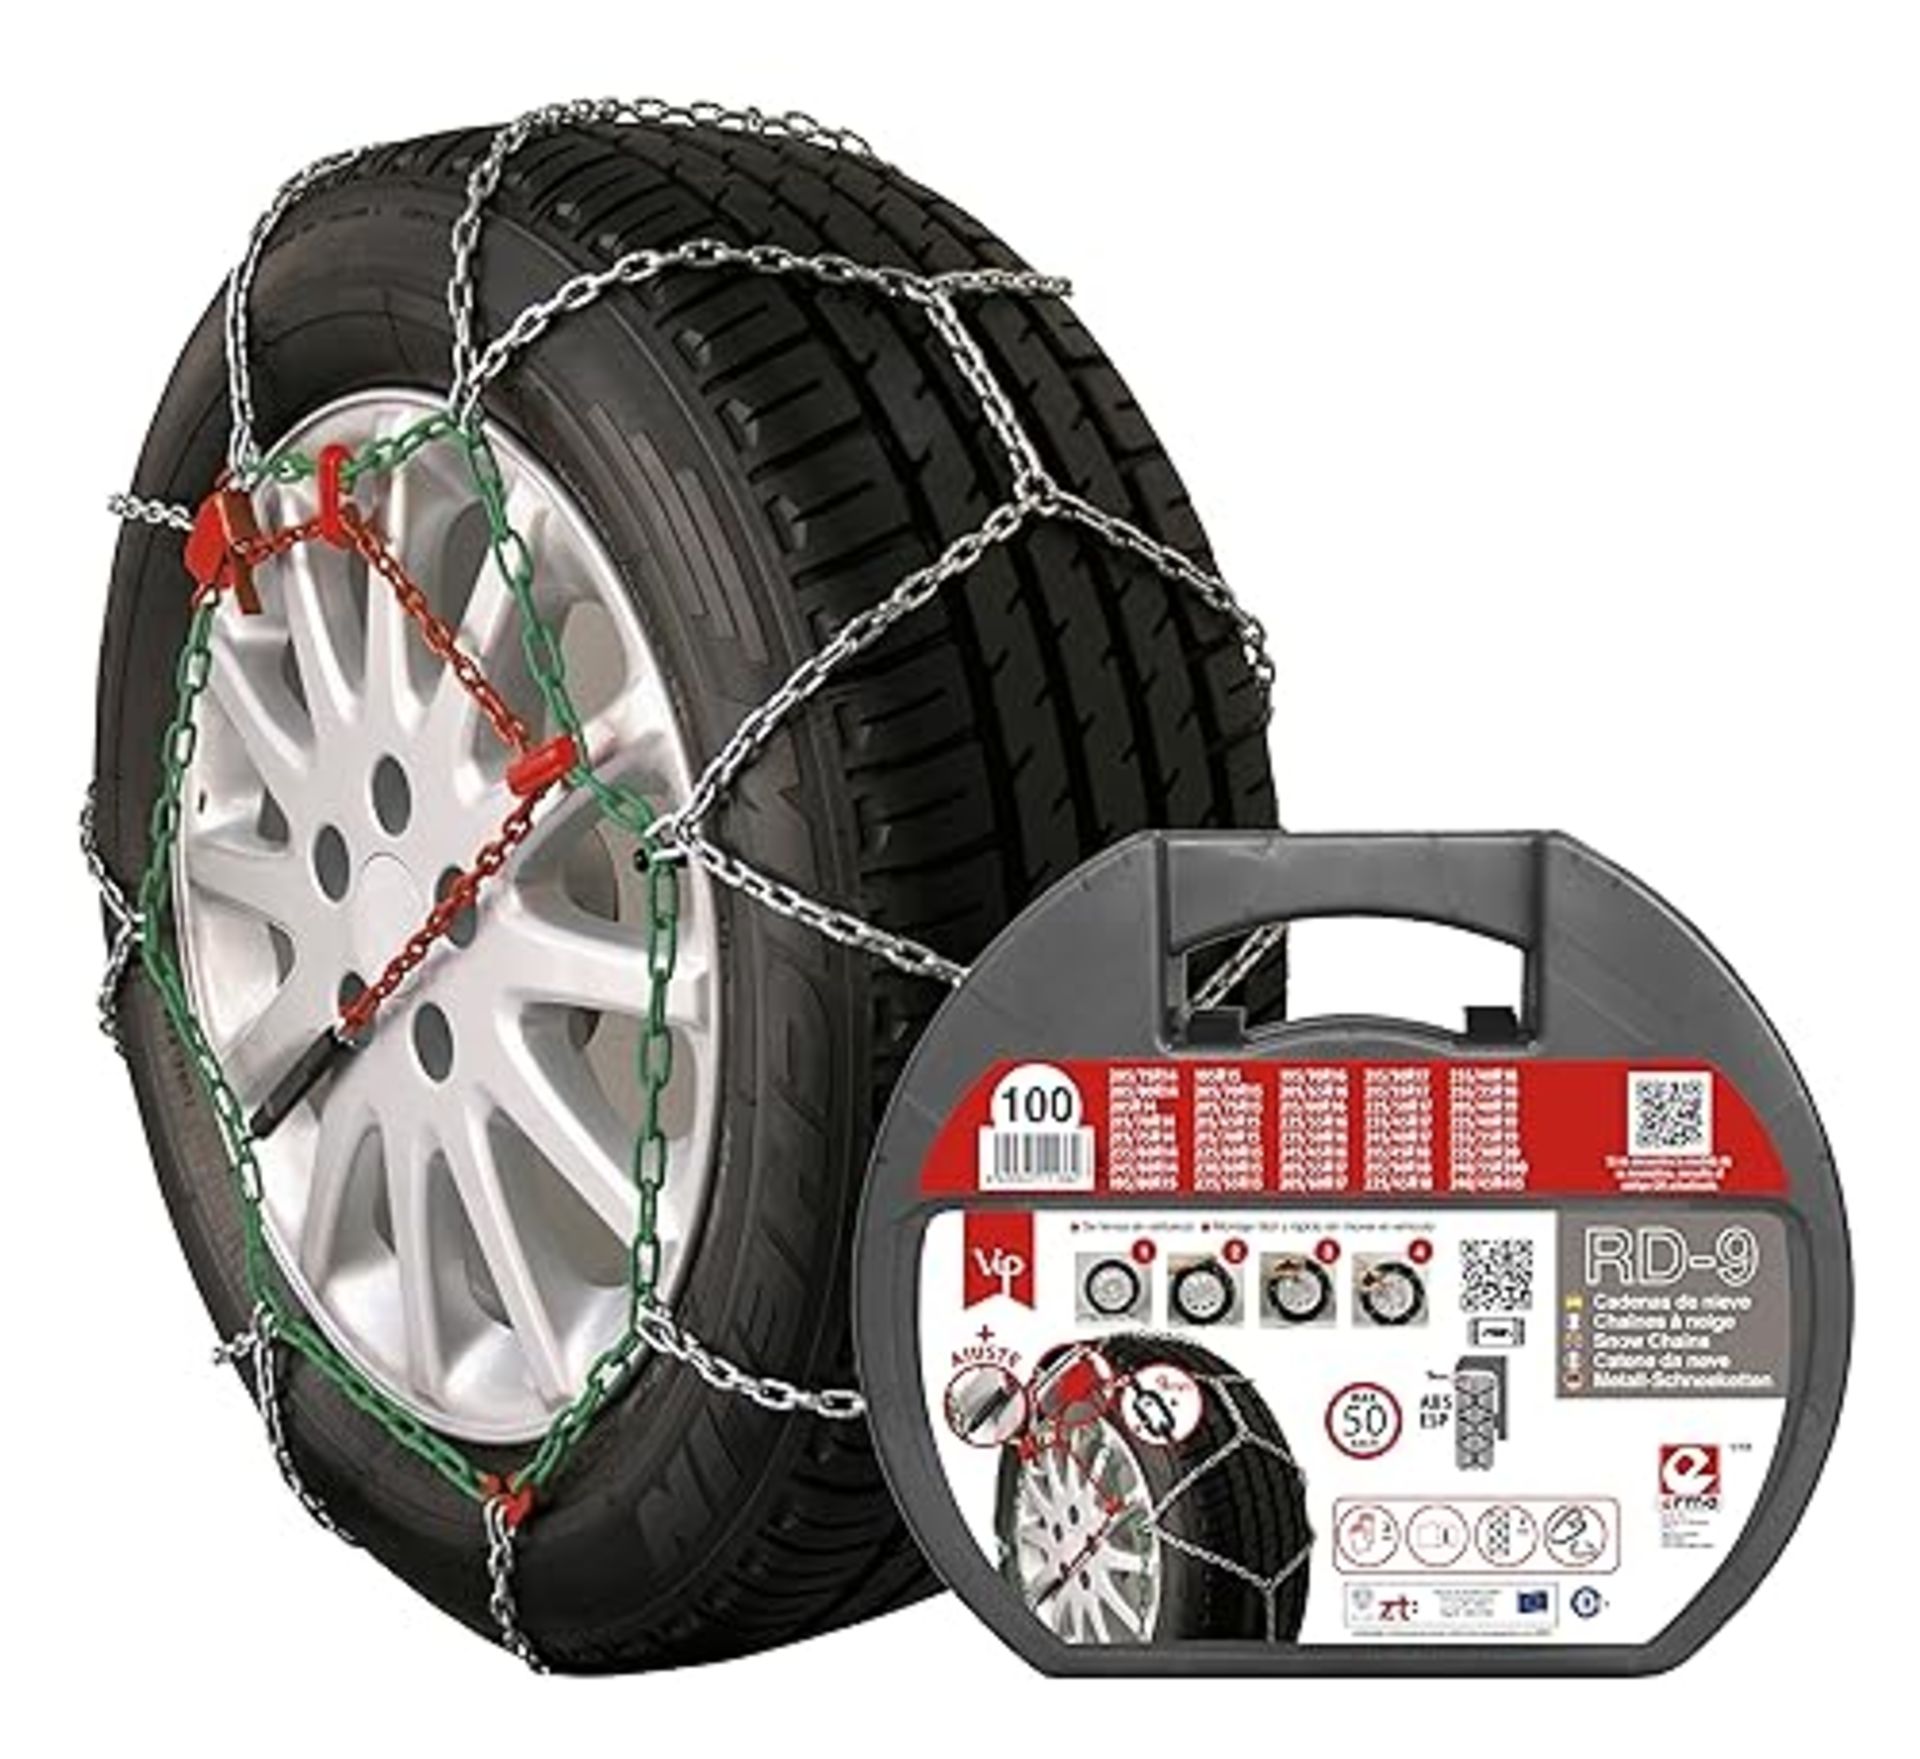 Snow chains made of metal mm size no. 100